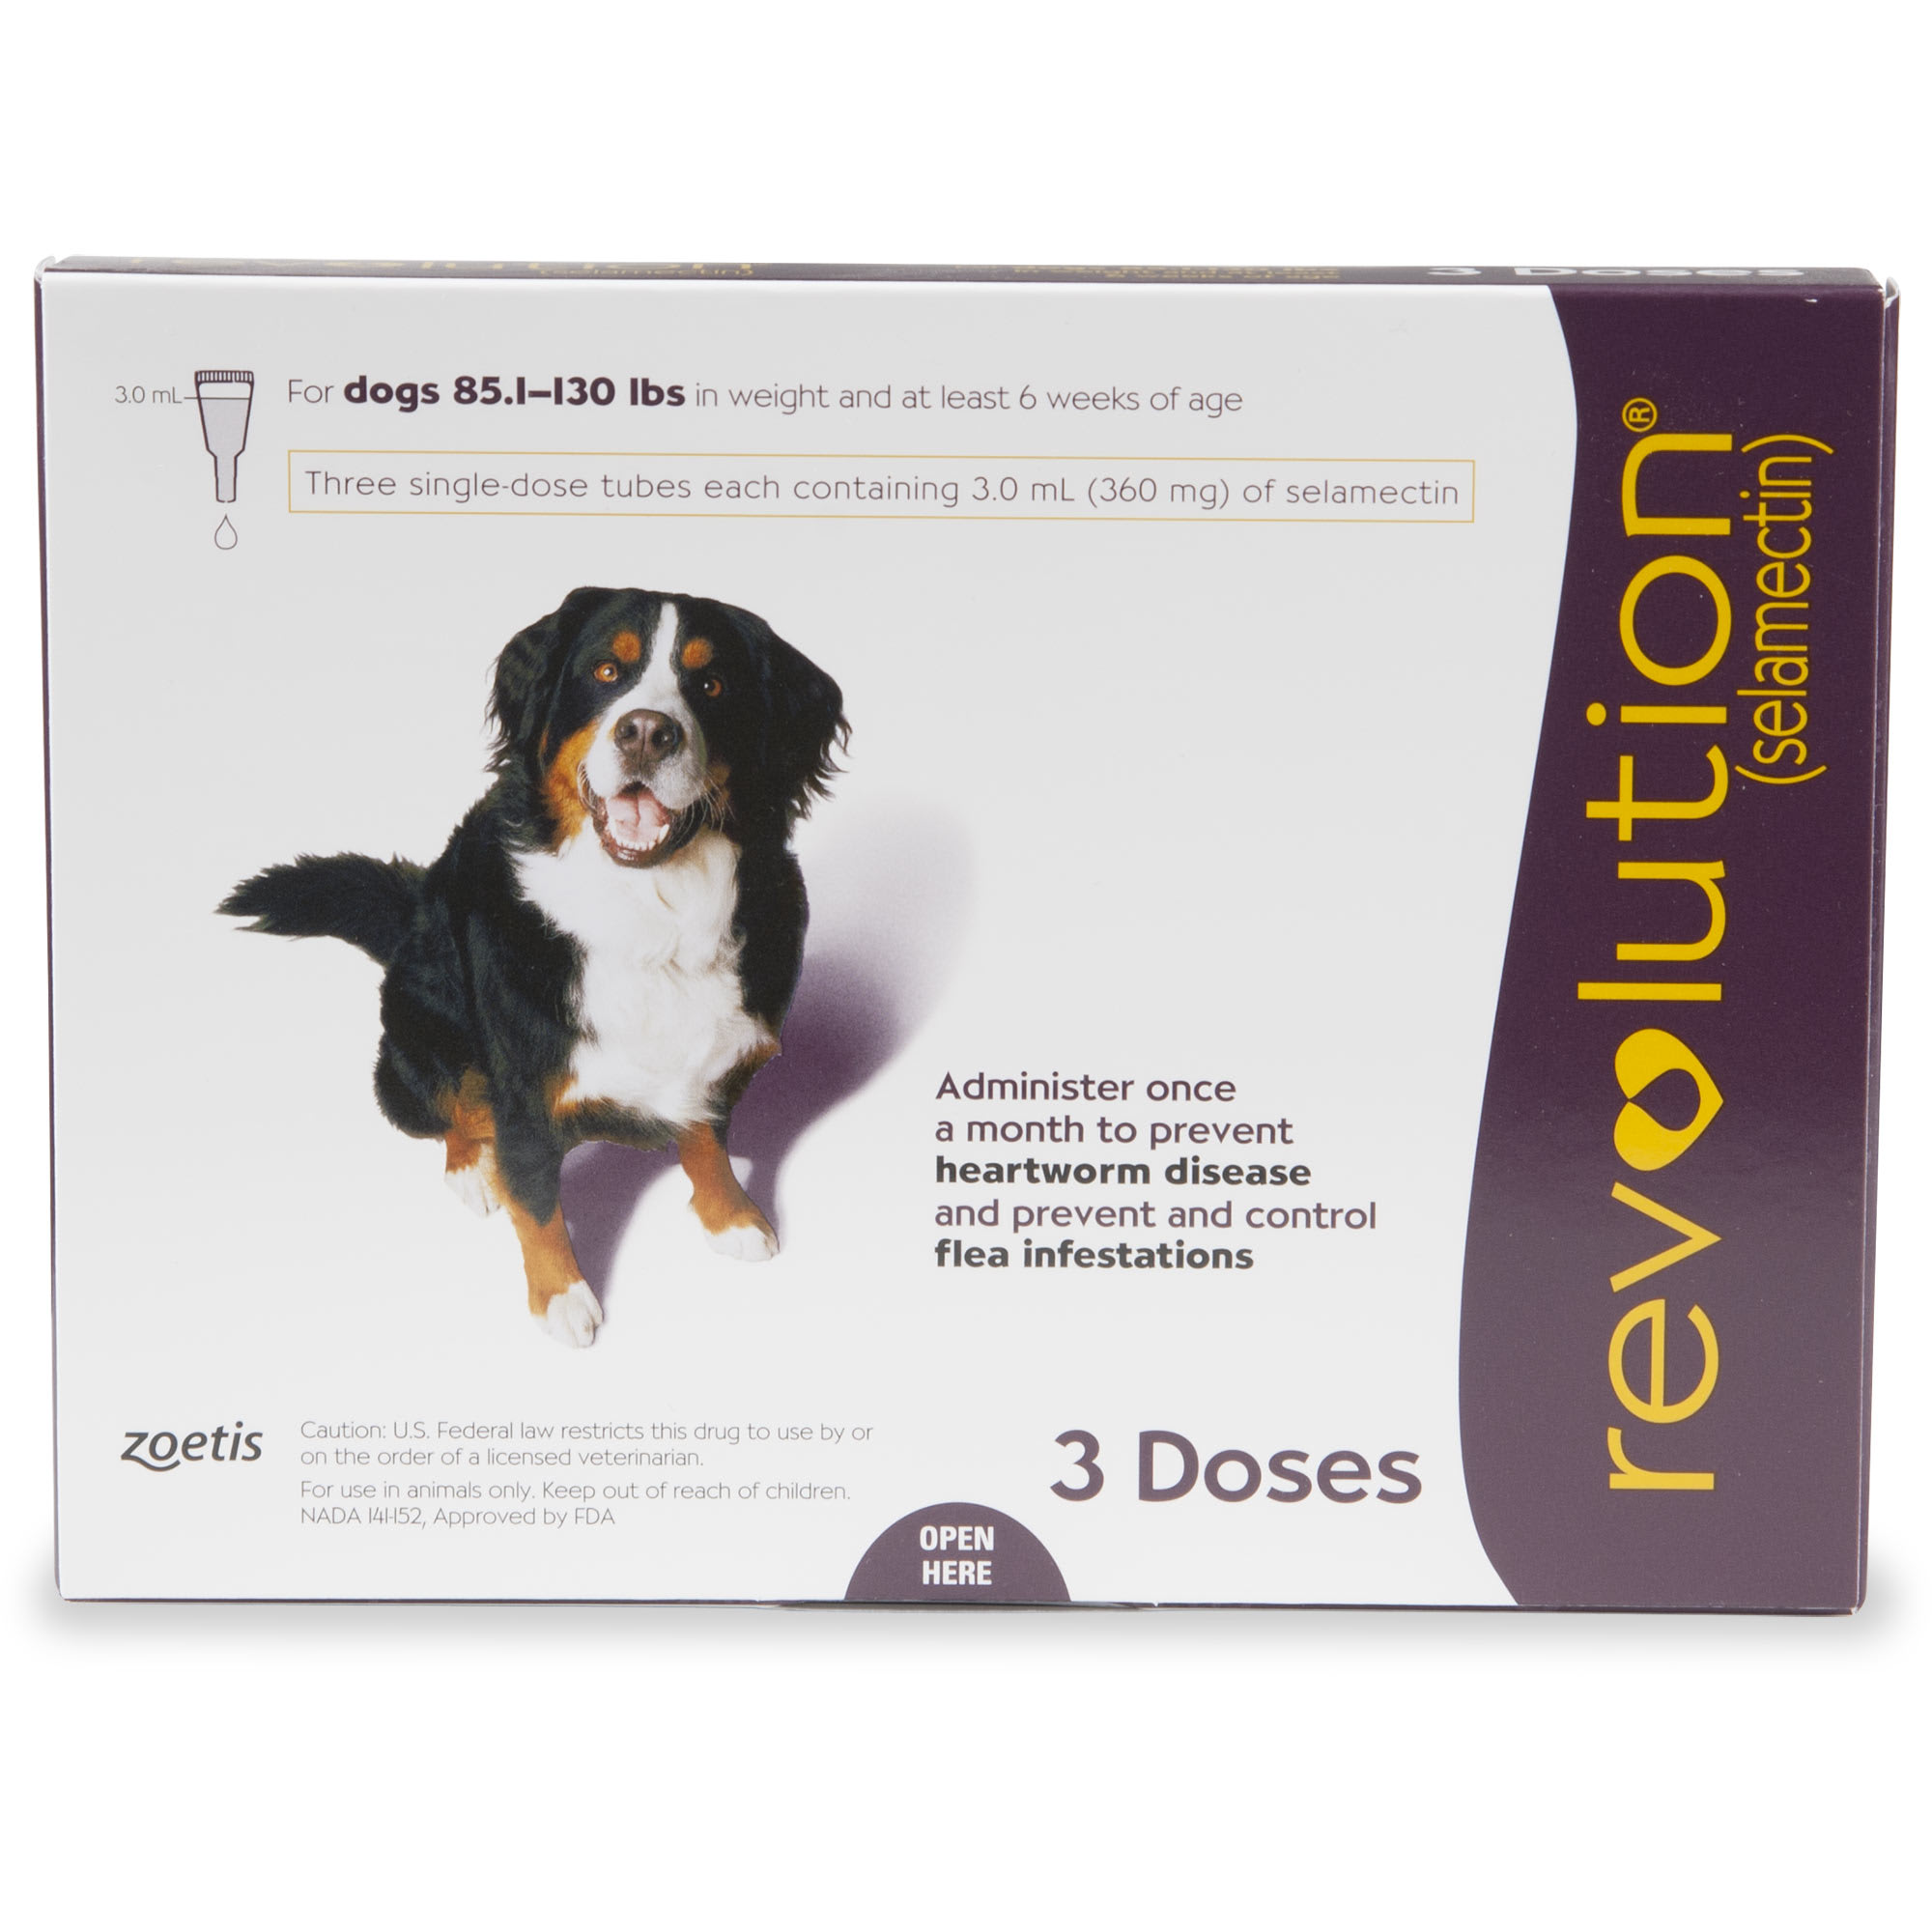 Photos - Dog Medicines & Vitamins Revolution Topical Solution for Dogs 85-130 lbs, 3 Month Supply 